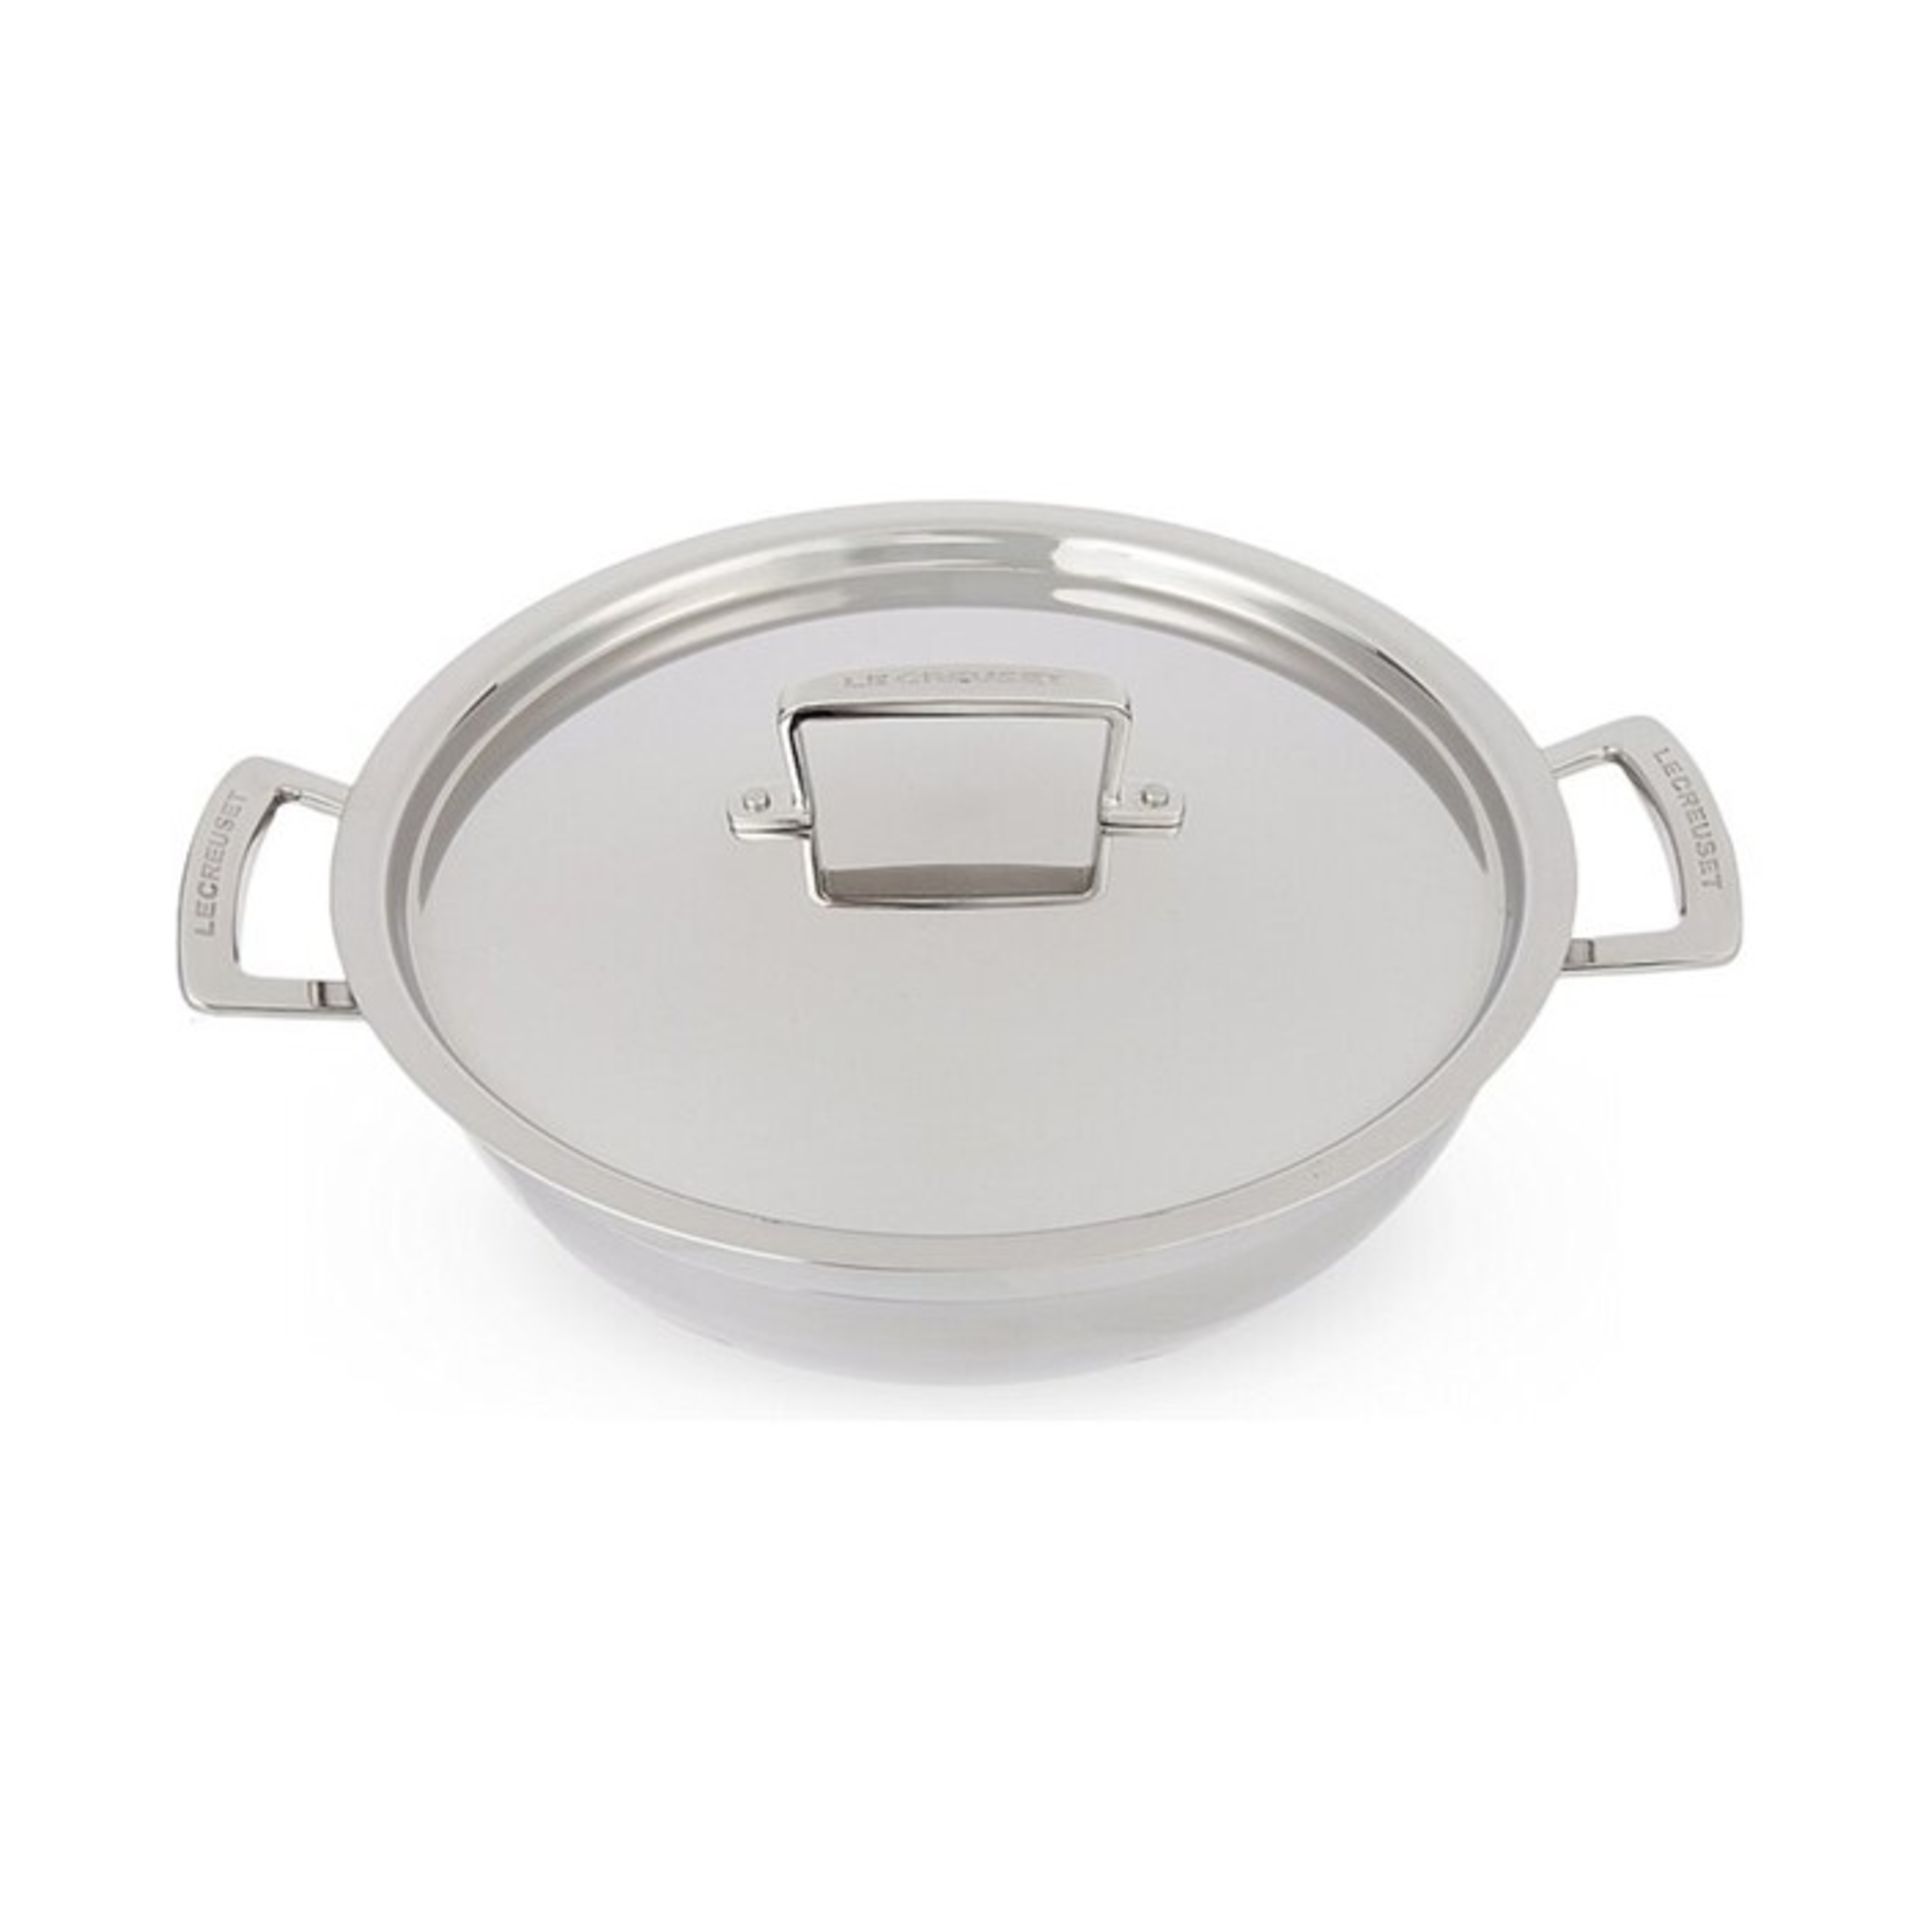 Le Creuset,VARIOUS ITEM INCLUDING 3 PLY STAINLESS STEEL COOKWARE 30 CM CASSEROLE ,GRILL PAN , - Image 2 of 6